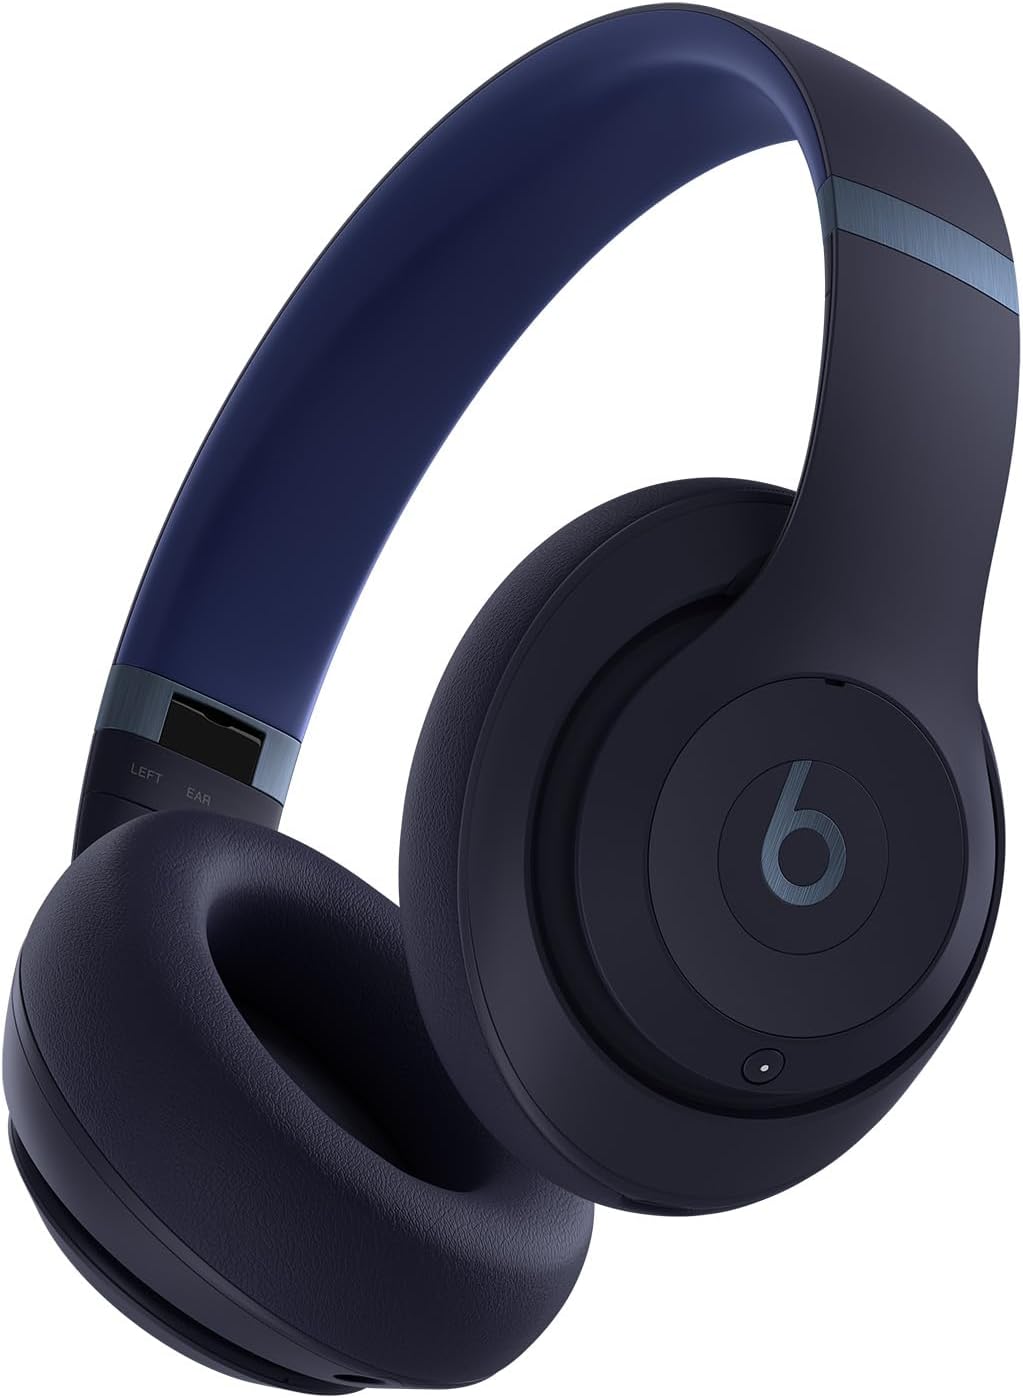 Beats Studio Pro - Wireless Bluetooth Noise Cancelling Headphones - Personalized Spatial Audio, USB-C Lossless Audio, Apple & Android Compatibility, Up to 40 Hours Battery Life - Navy